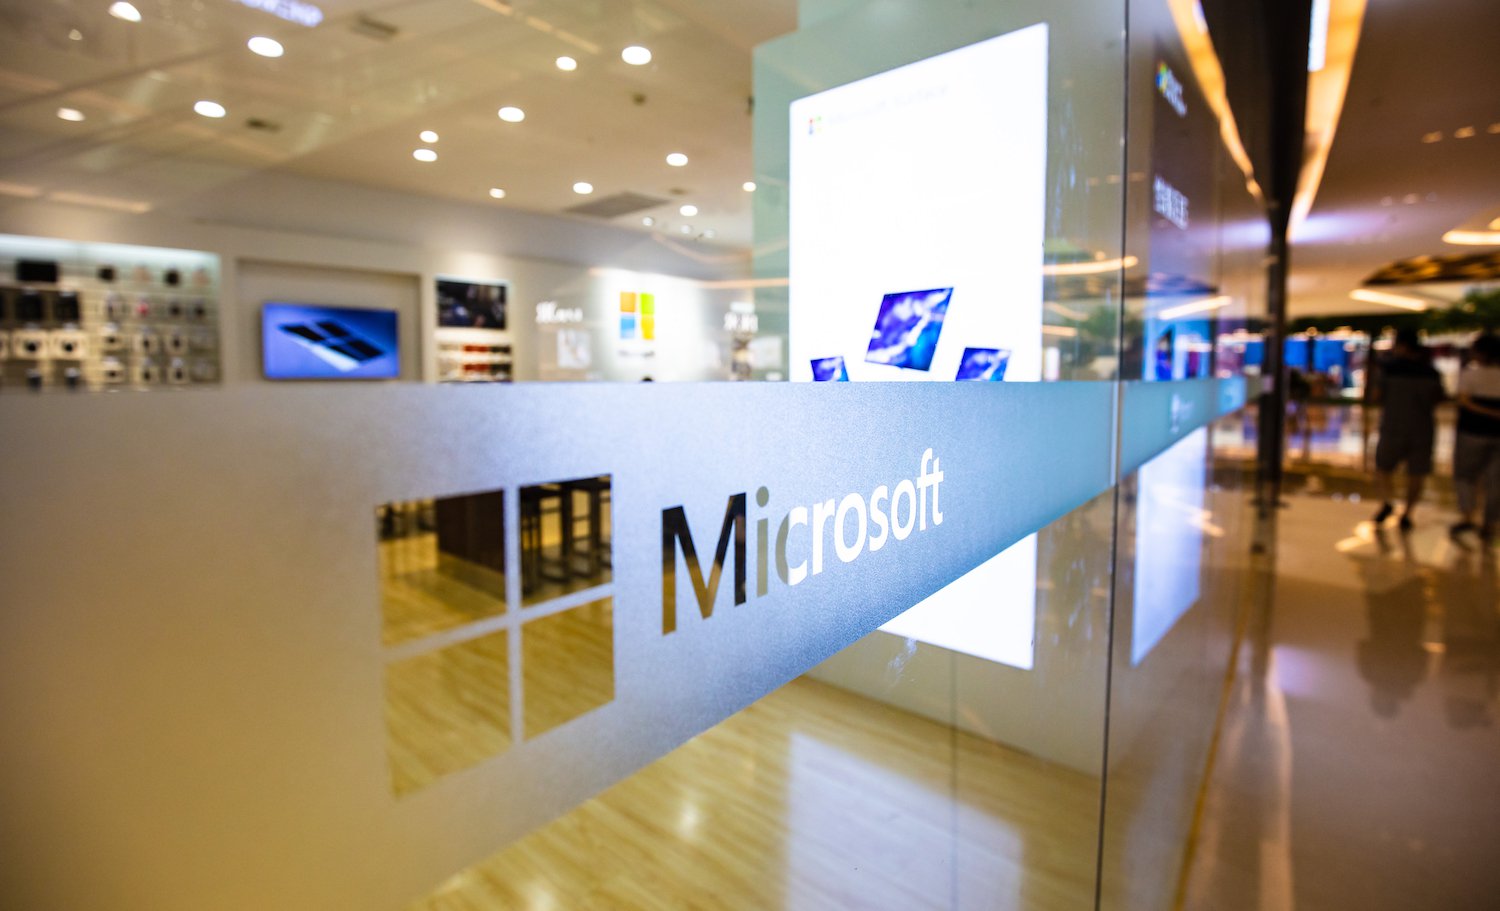 Microsoft Is Pushing New Blockchain ID Products (But There’s Pushback, Too)